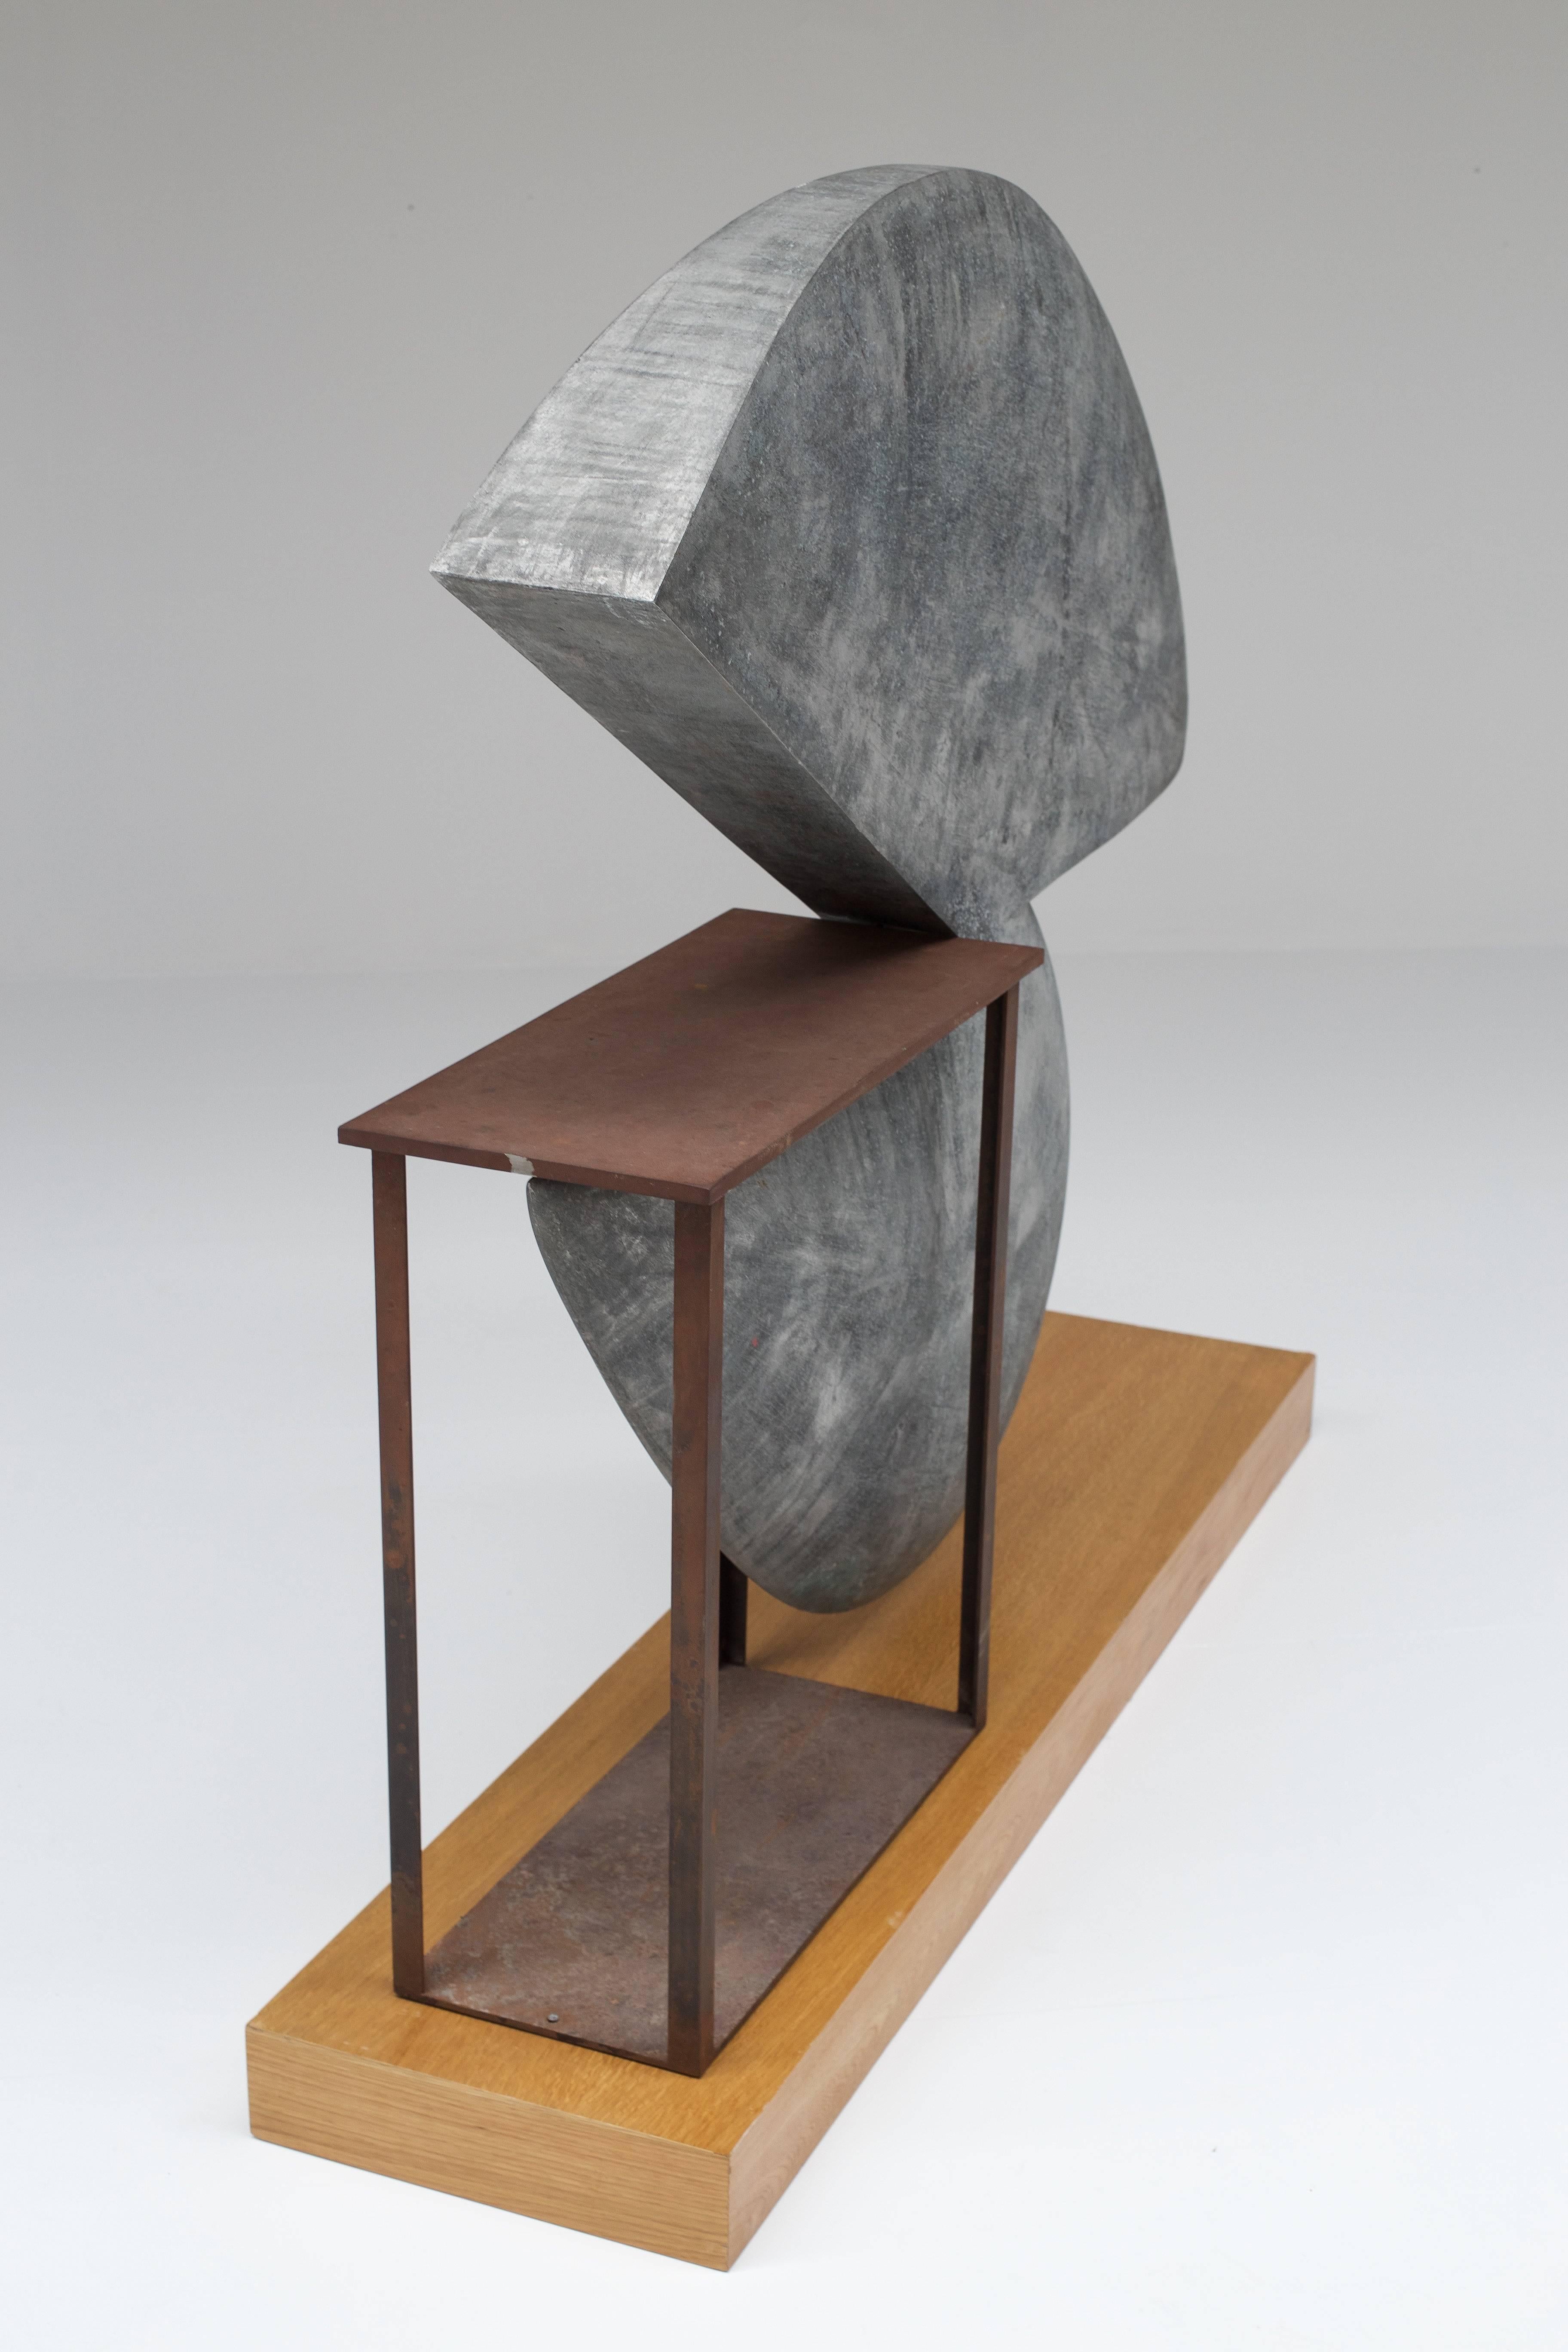 Dated and signed sculpture 'Cardinal 1987, WK'

Sculpture in aluminium, on steel base, resting on a wooden soccle.

Measures: 140 x 130 x 69 cm

Exhibited in 1987 in New York, Blum Elman Gallery, Win Knowlton, new sculpture, 1987

Reproduced